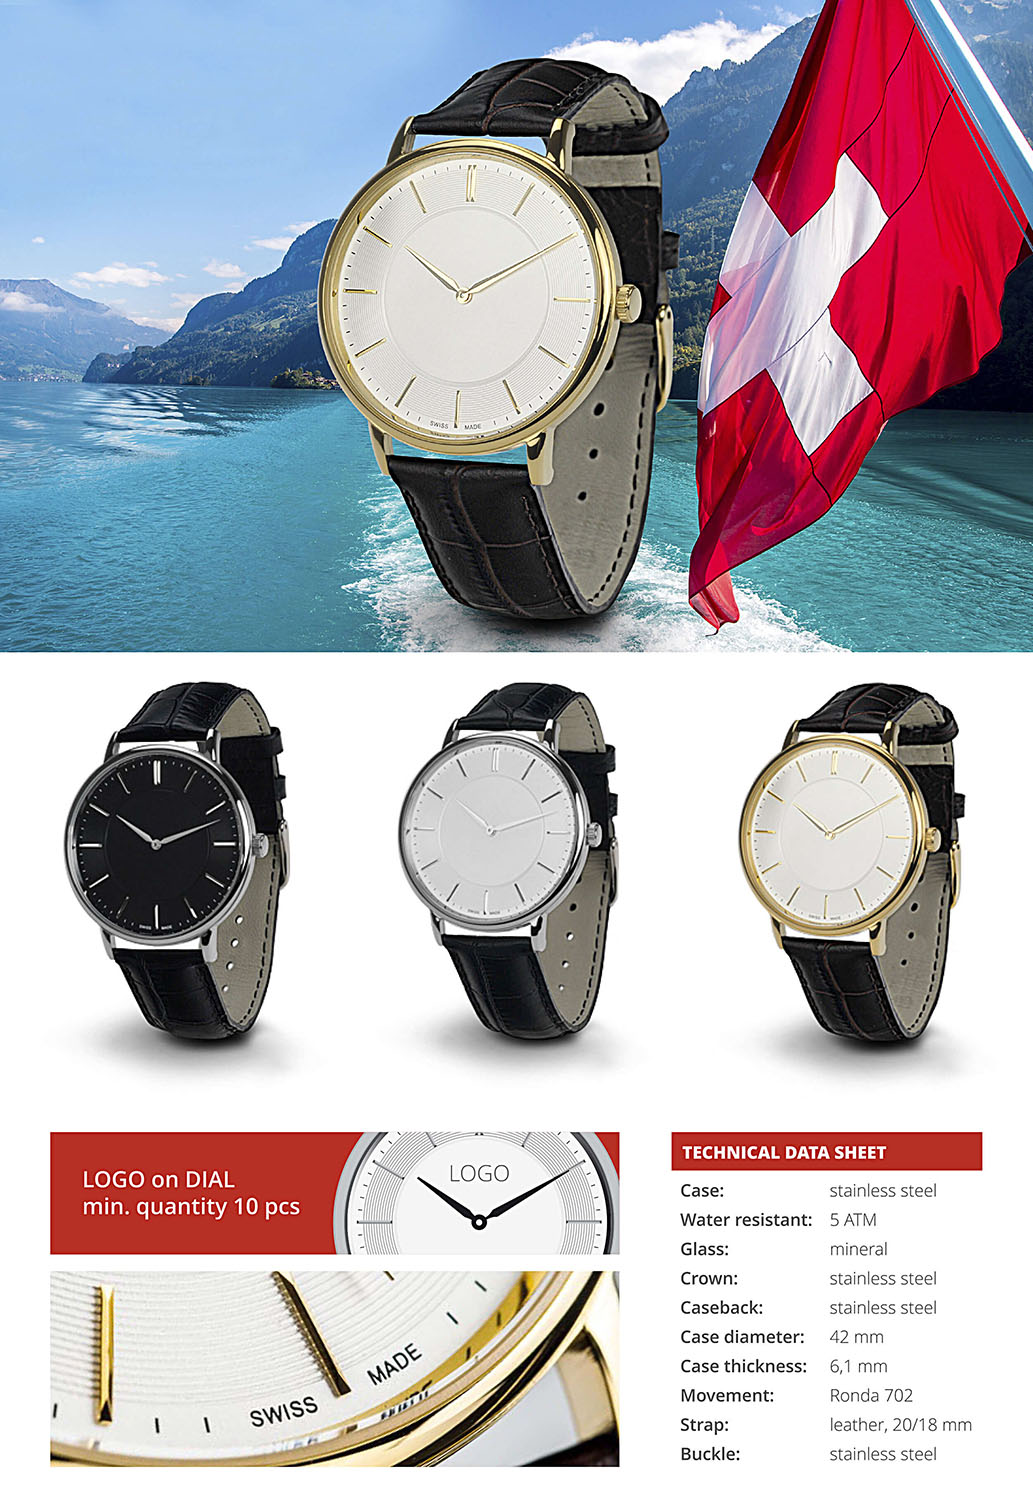 Watch Livigno. Glass: mineral, Crown: stainless steel and wter resistant